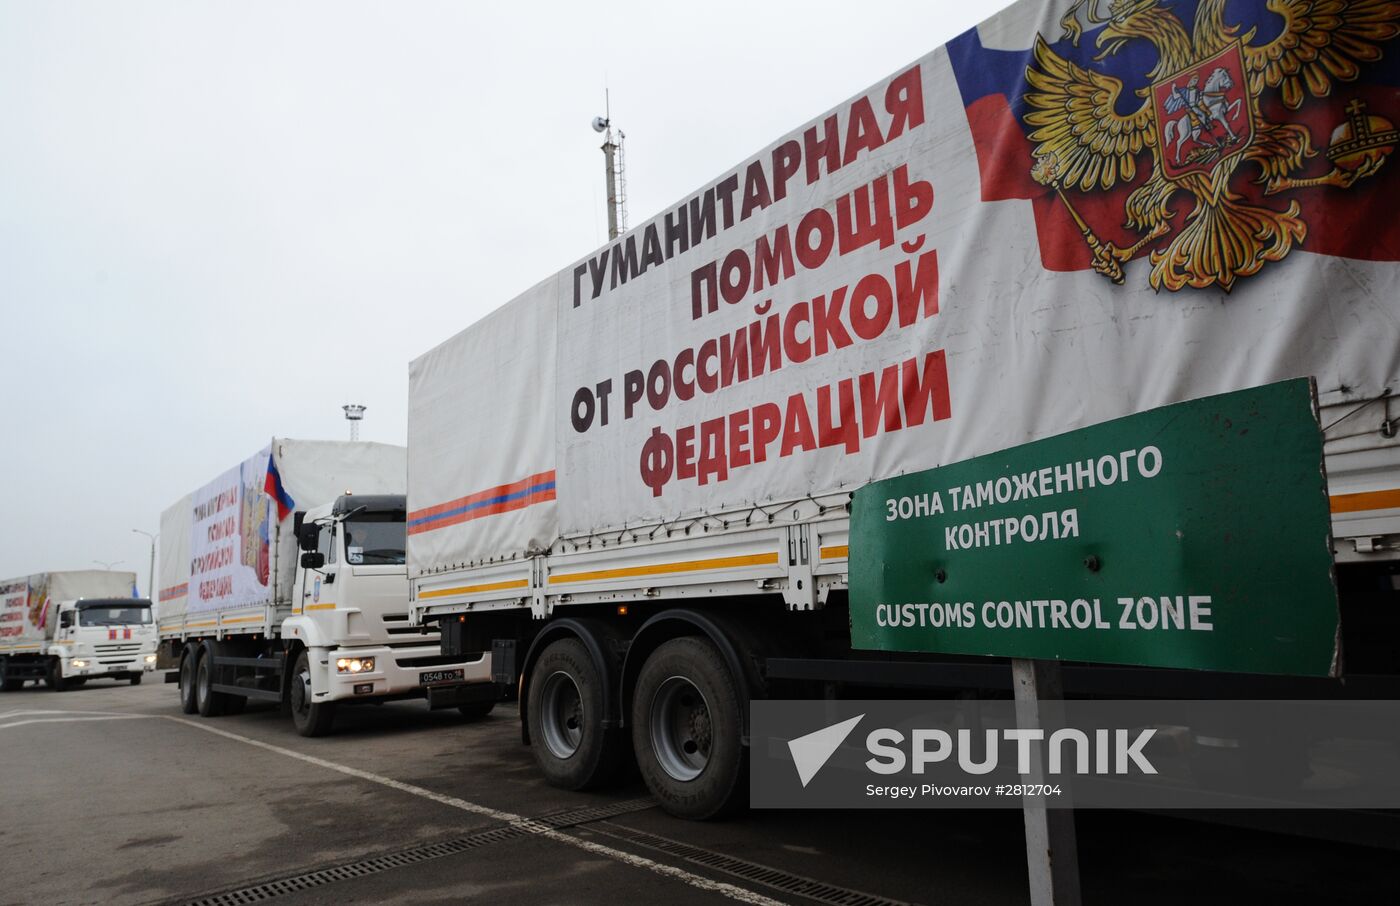 Russia's 50th humanitarian convoy on its way to Donbass